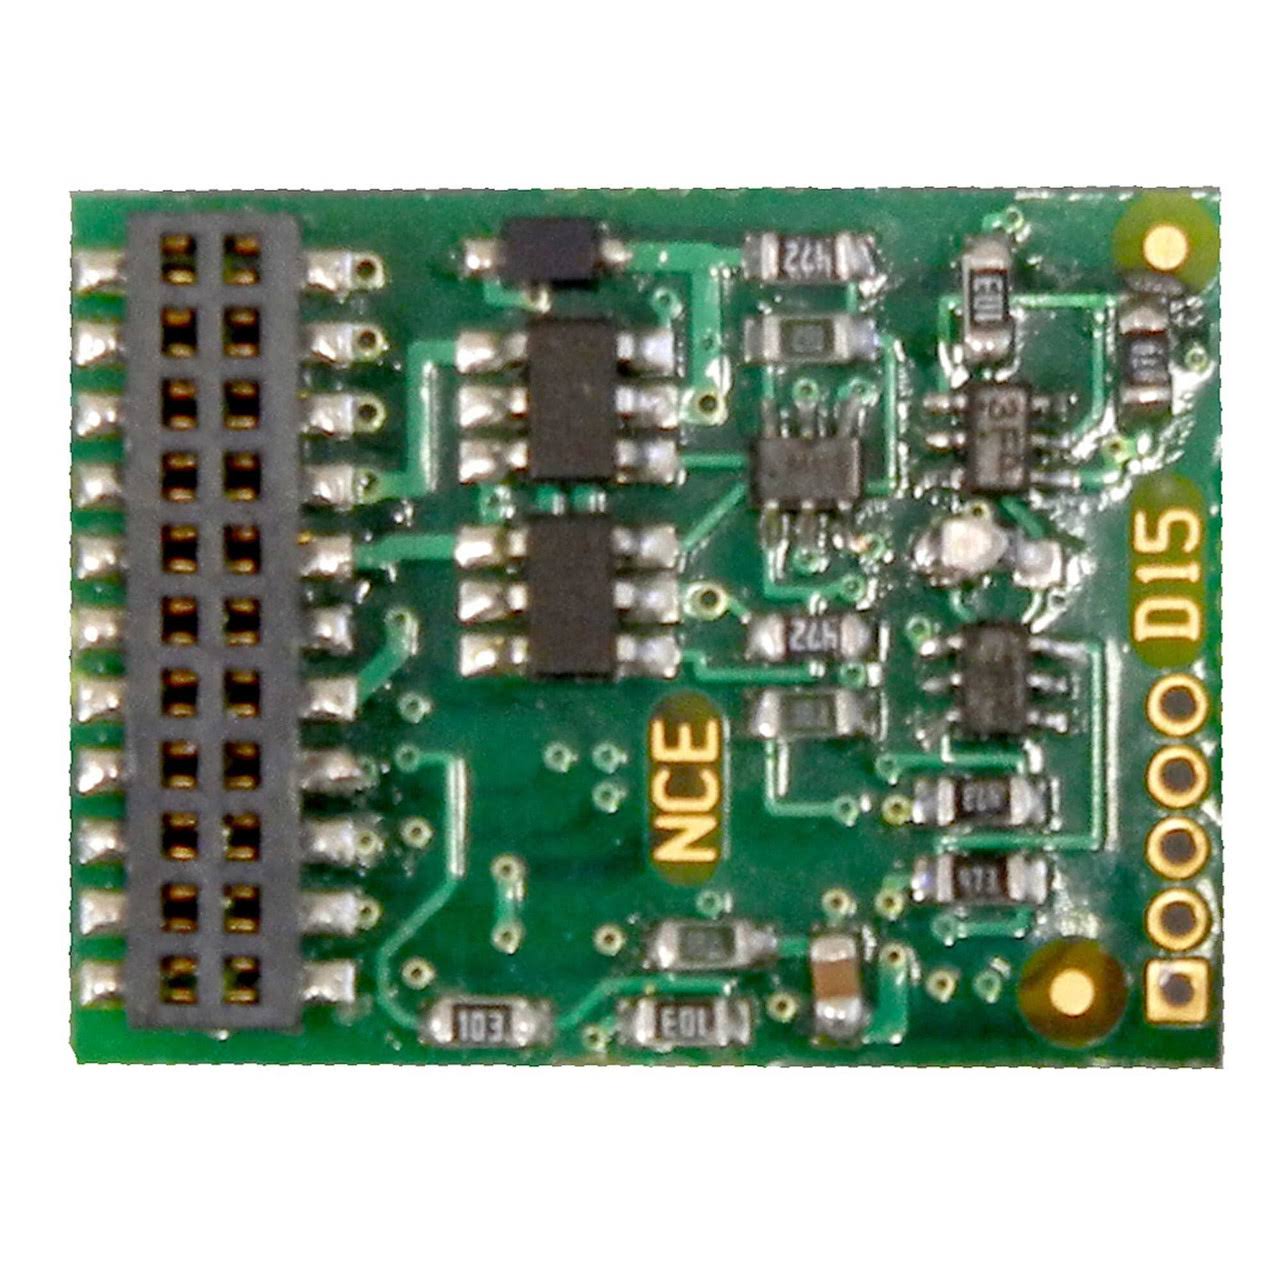 NCE DCC 0156 D16MTC 21 Pin Decoder